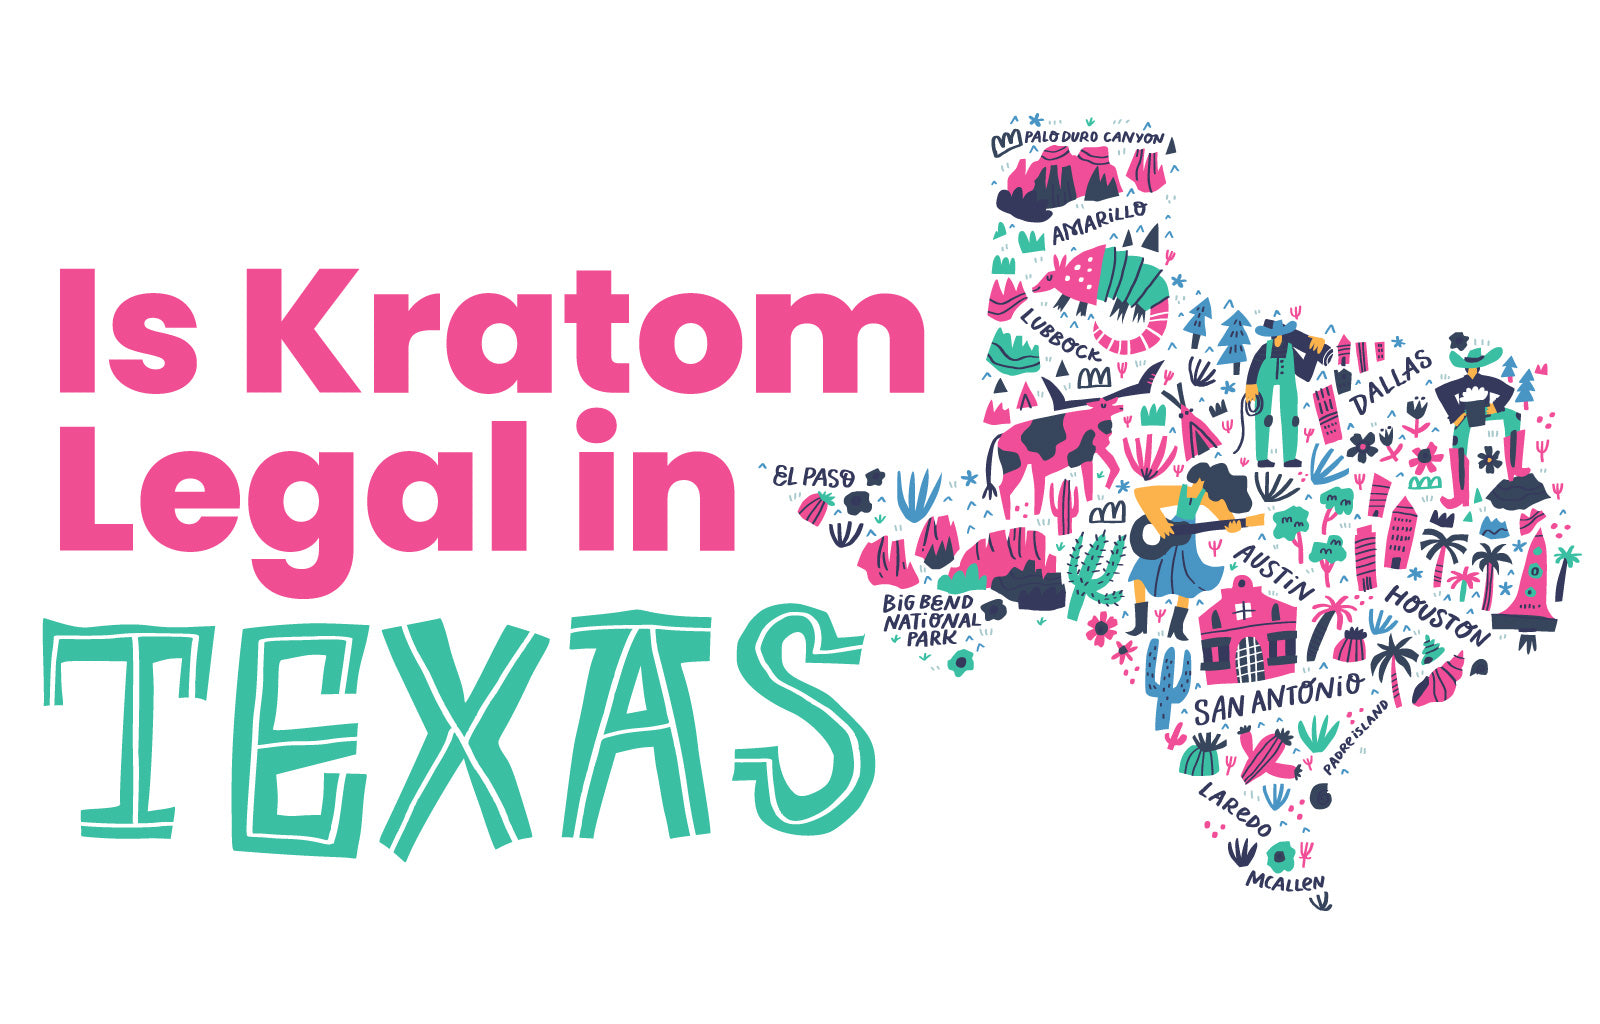 Featured image depicting a colorful image of the state of Texas, along with the phrase 'Is Kratom Legal in Texas'